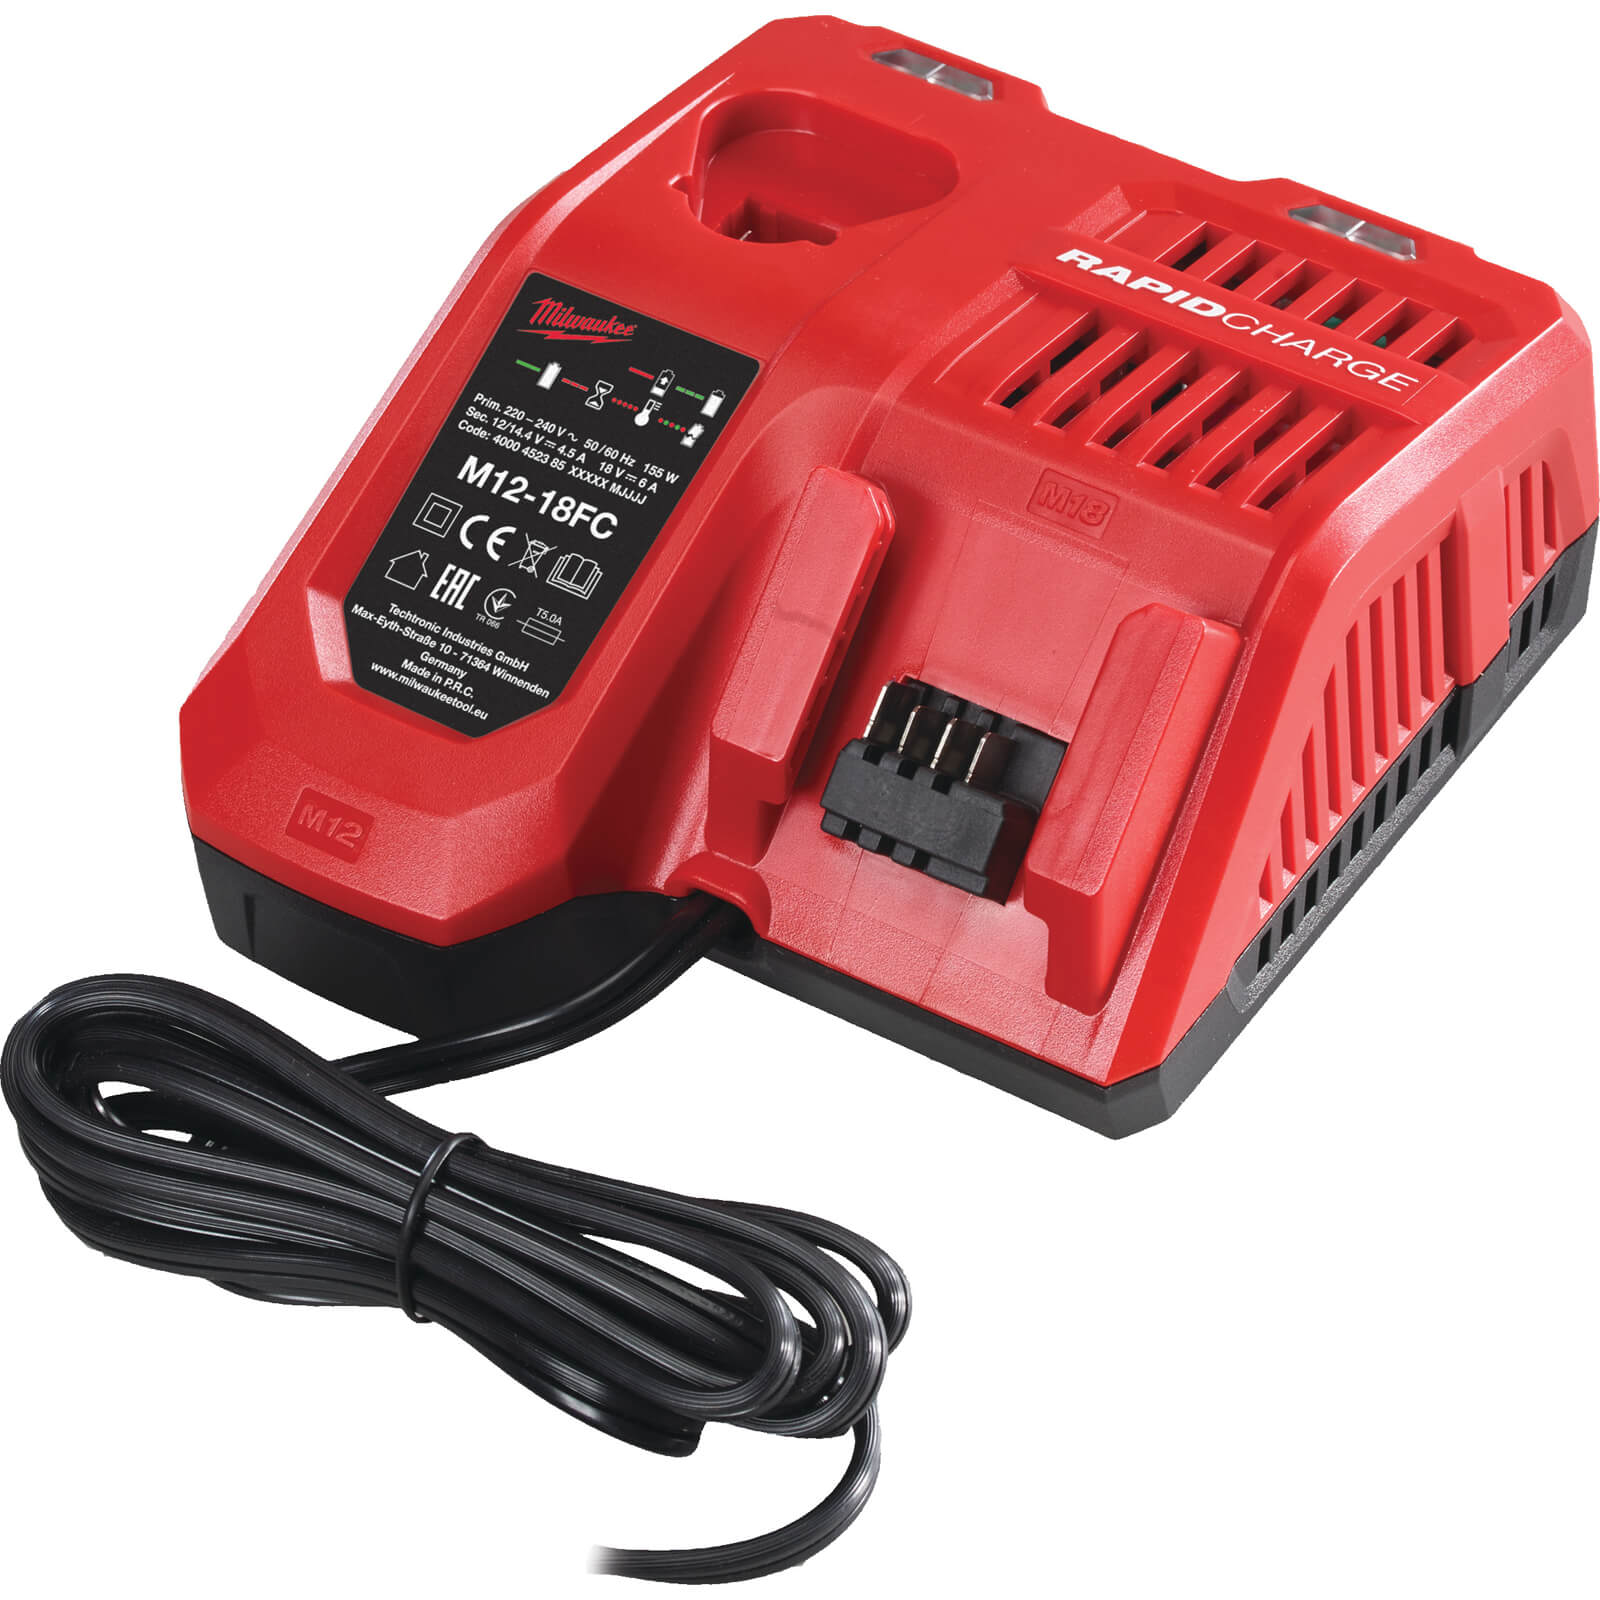 Photos - Power Tool Battery Milwaukee M12-18 FC 18v Multi Fast Battery Charger 240v M12-18FC 